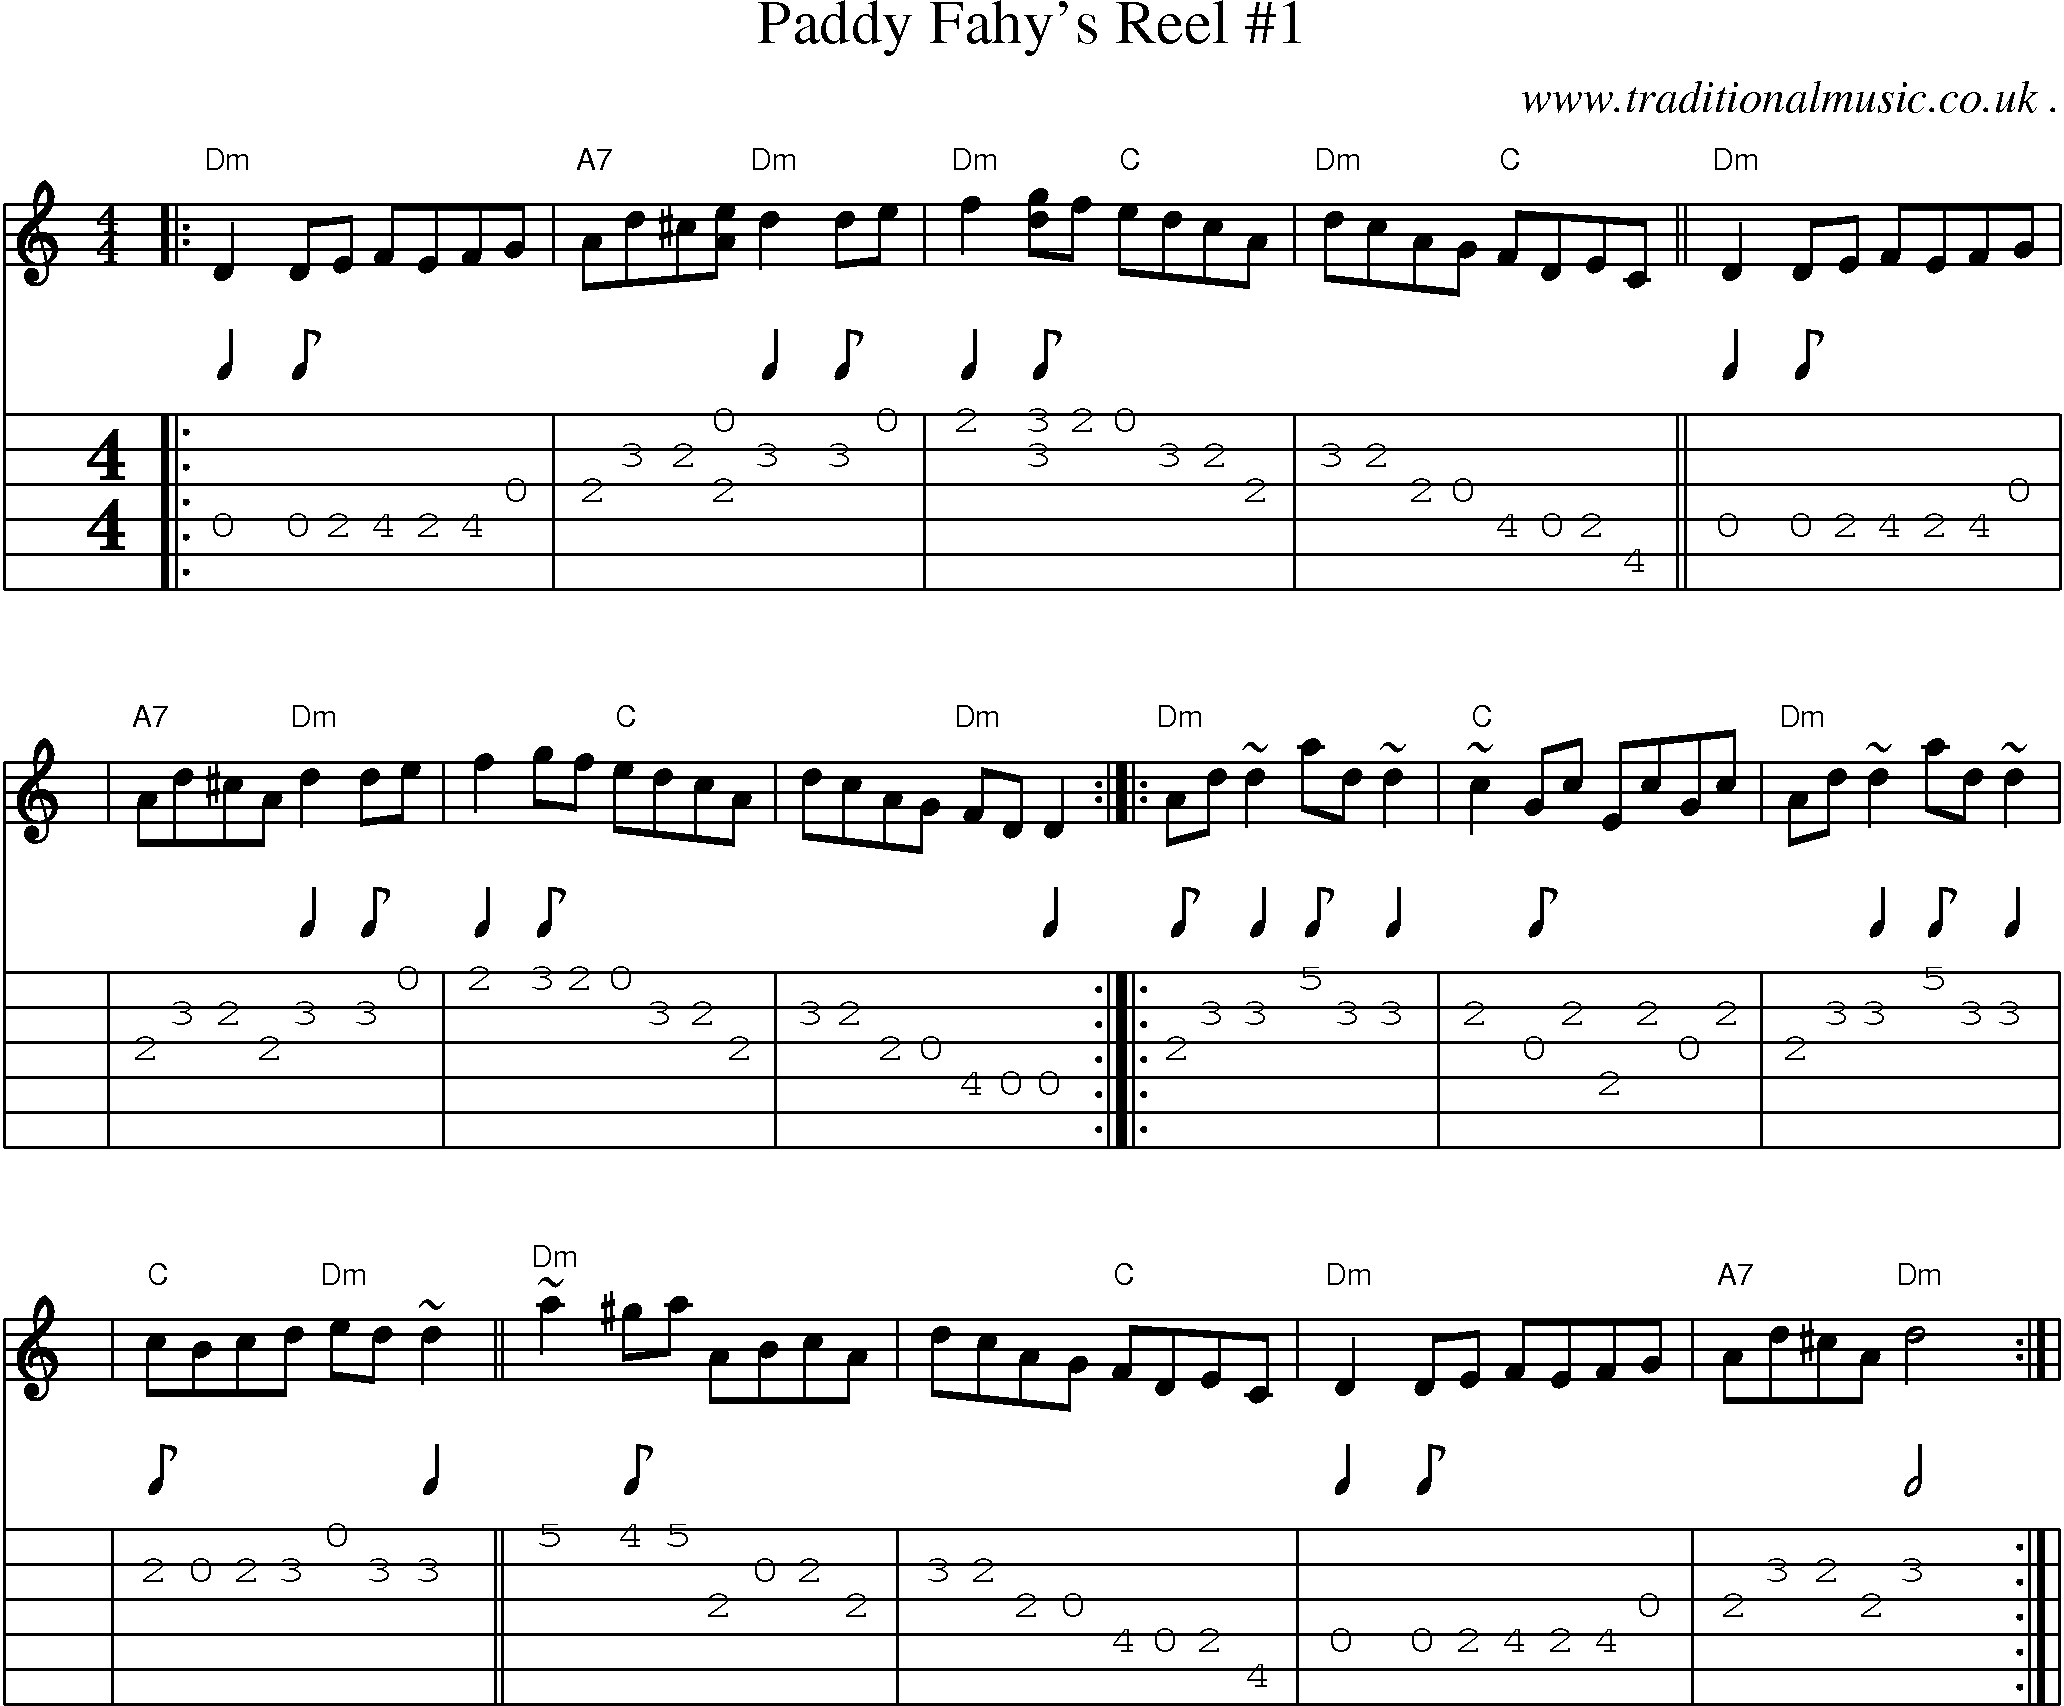 Sheet-music  score, Chords and Guitar Tabs for Paddy Fahys Reel 1